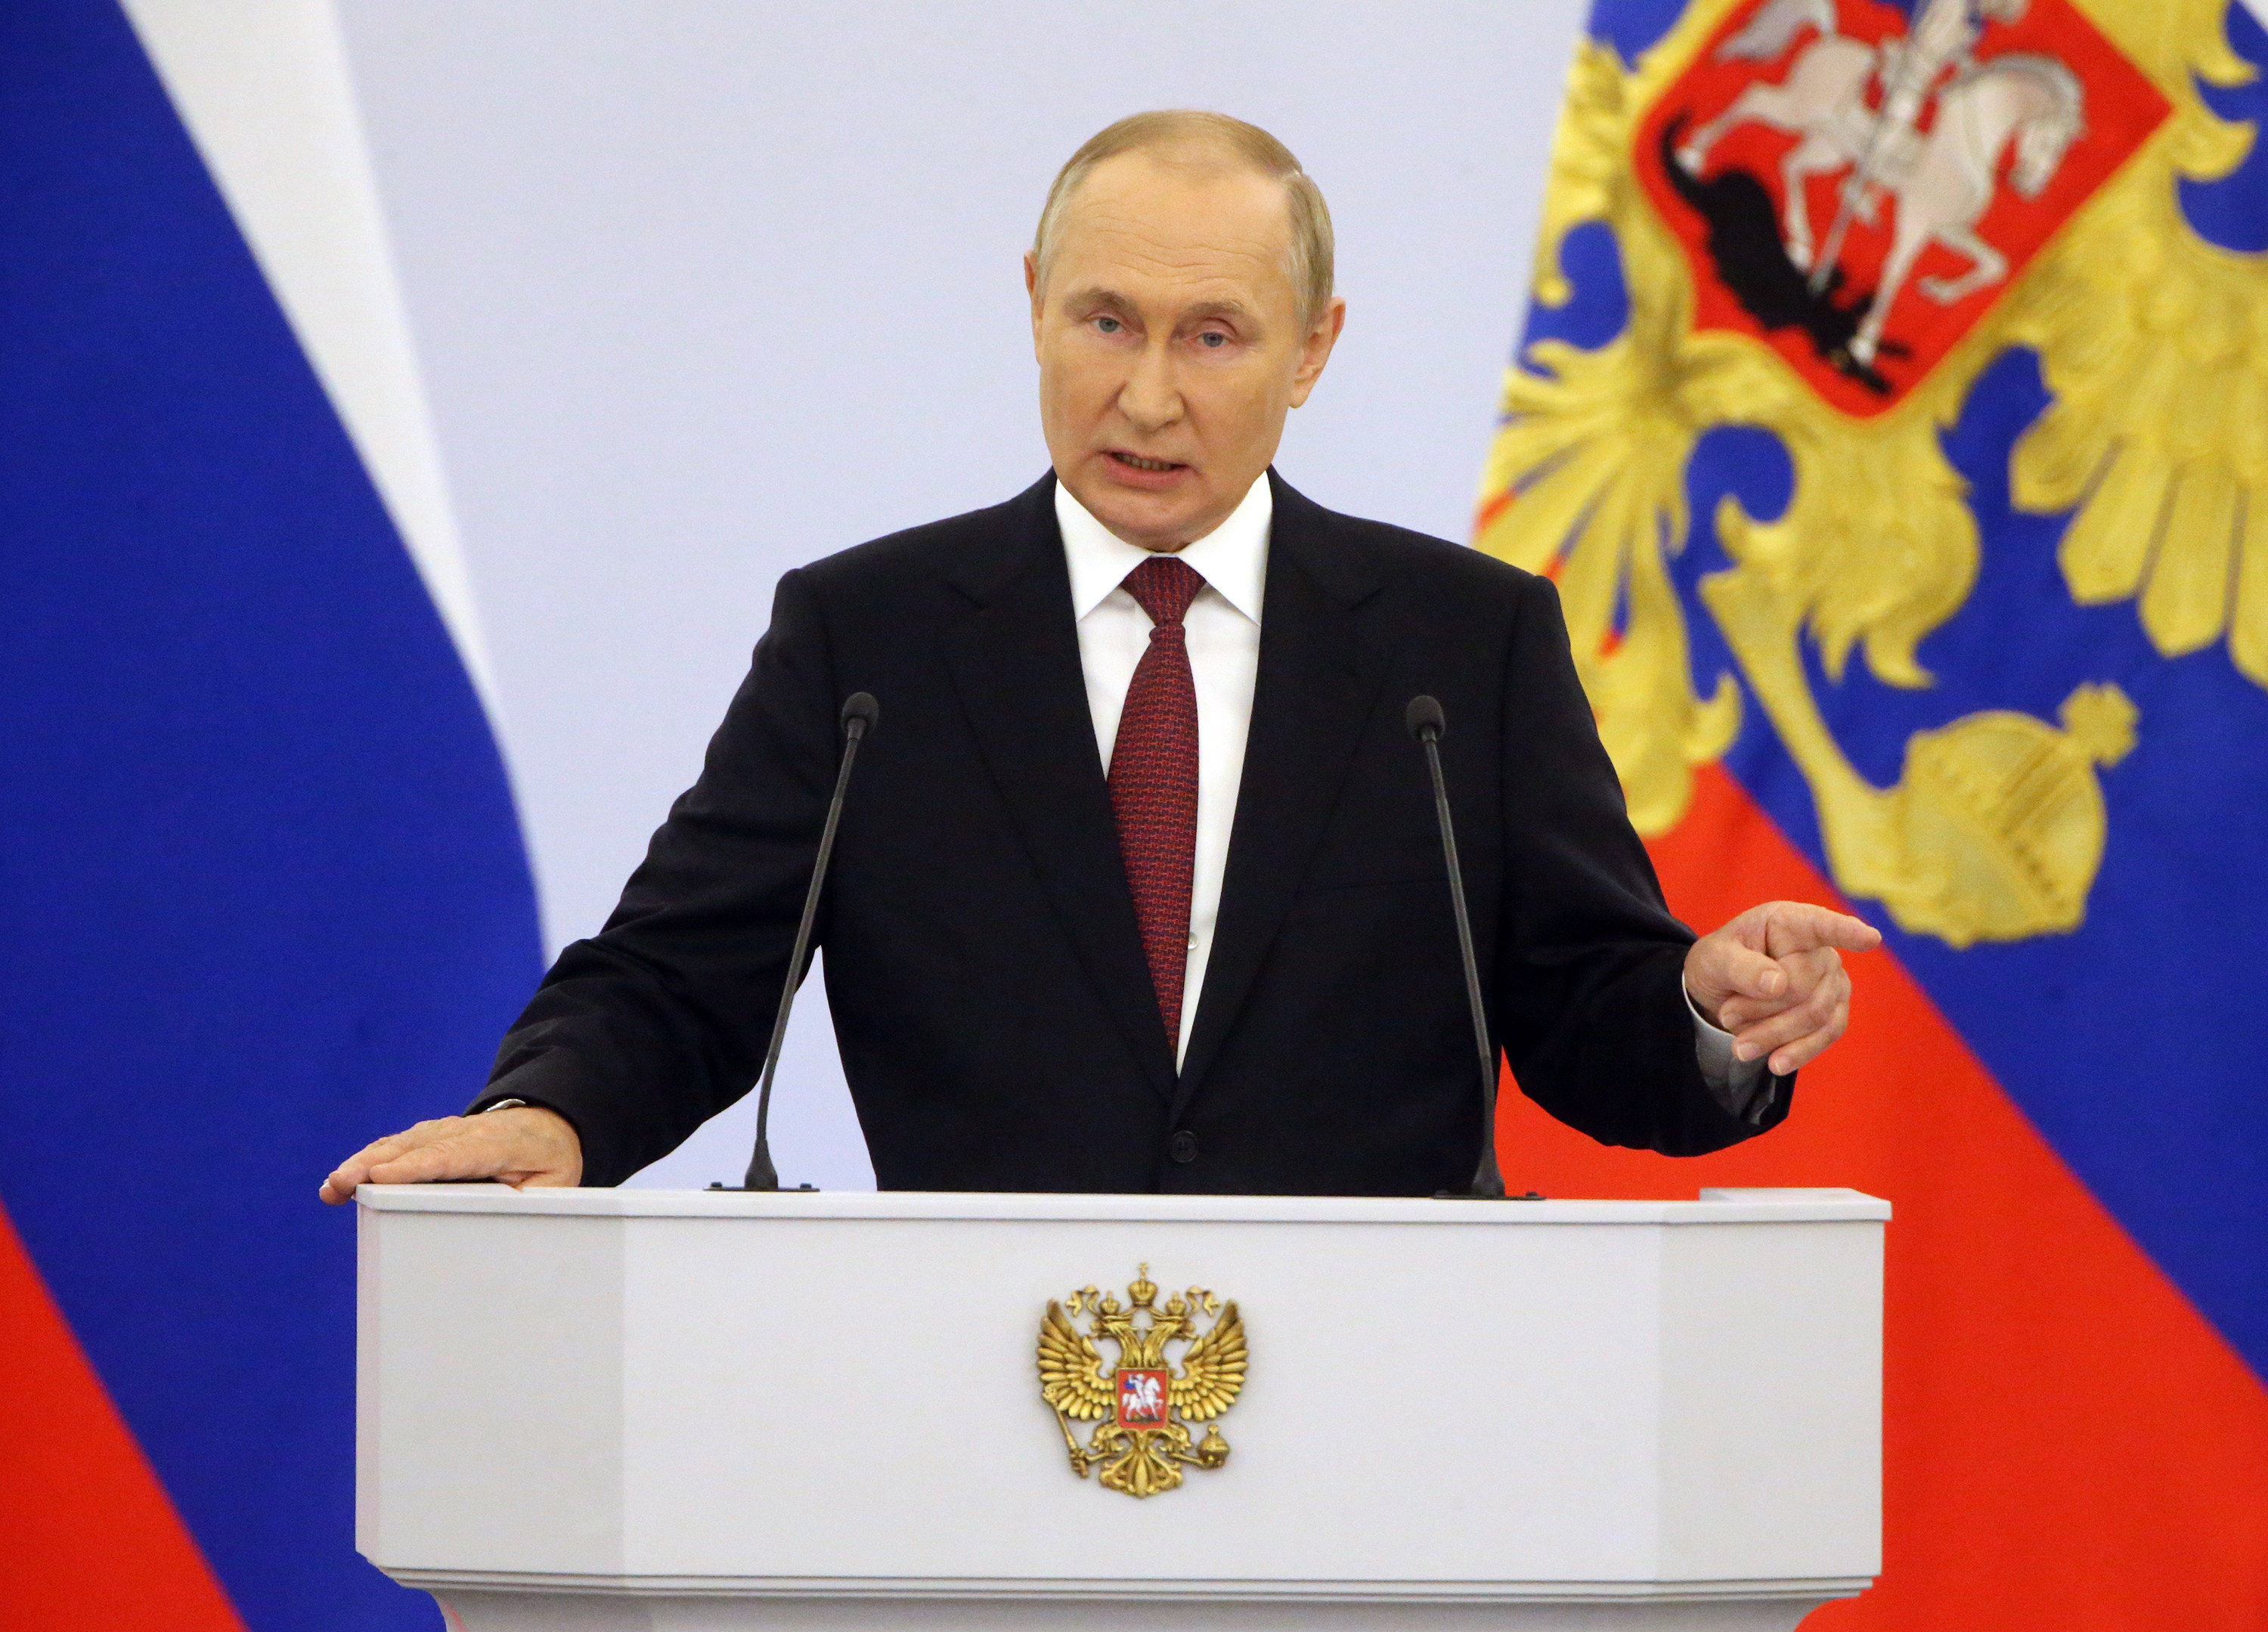 Russian President Vladimir Putin speaks during the signing ceremony with separatist leaders on the annexation of four Ukrainian regions at the Grand Kremlin Palace, on September 30, in Moscow, Russia.